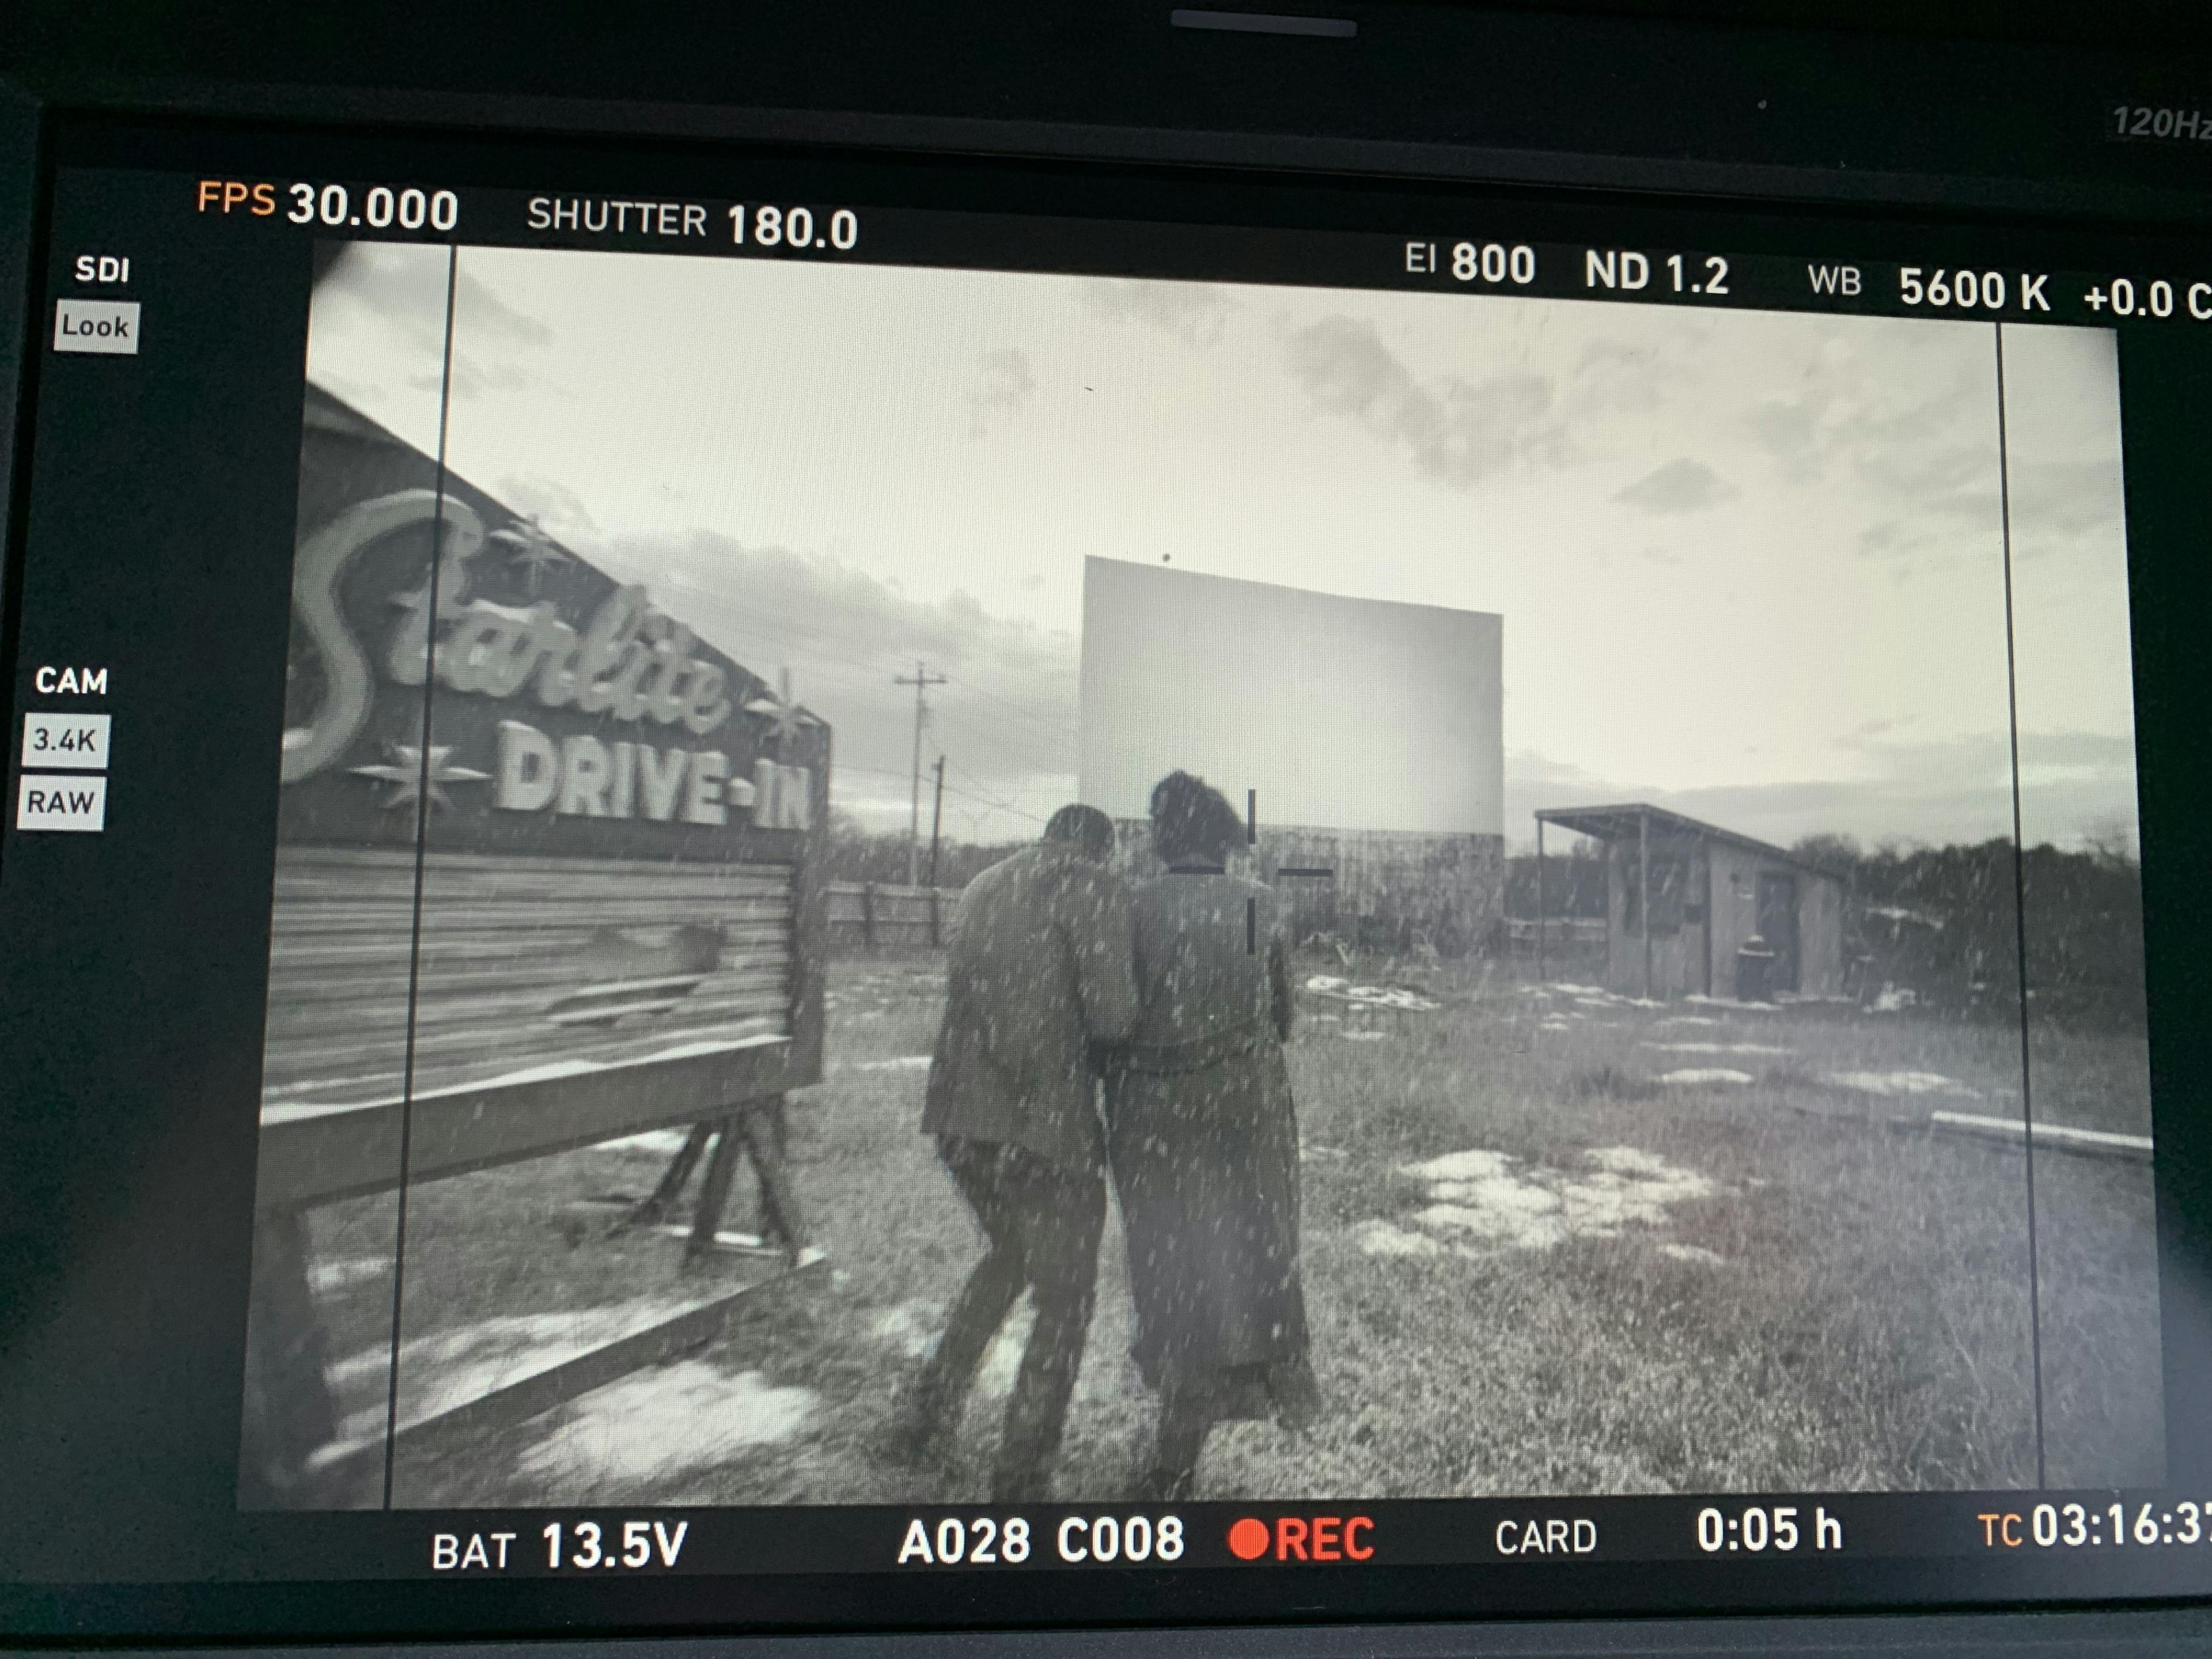 An image of a video camera screen showing two people walking into a drive-in movie theater